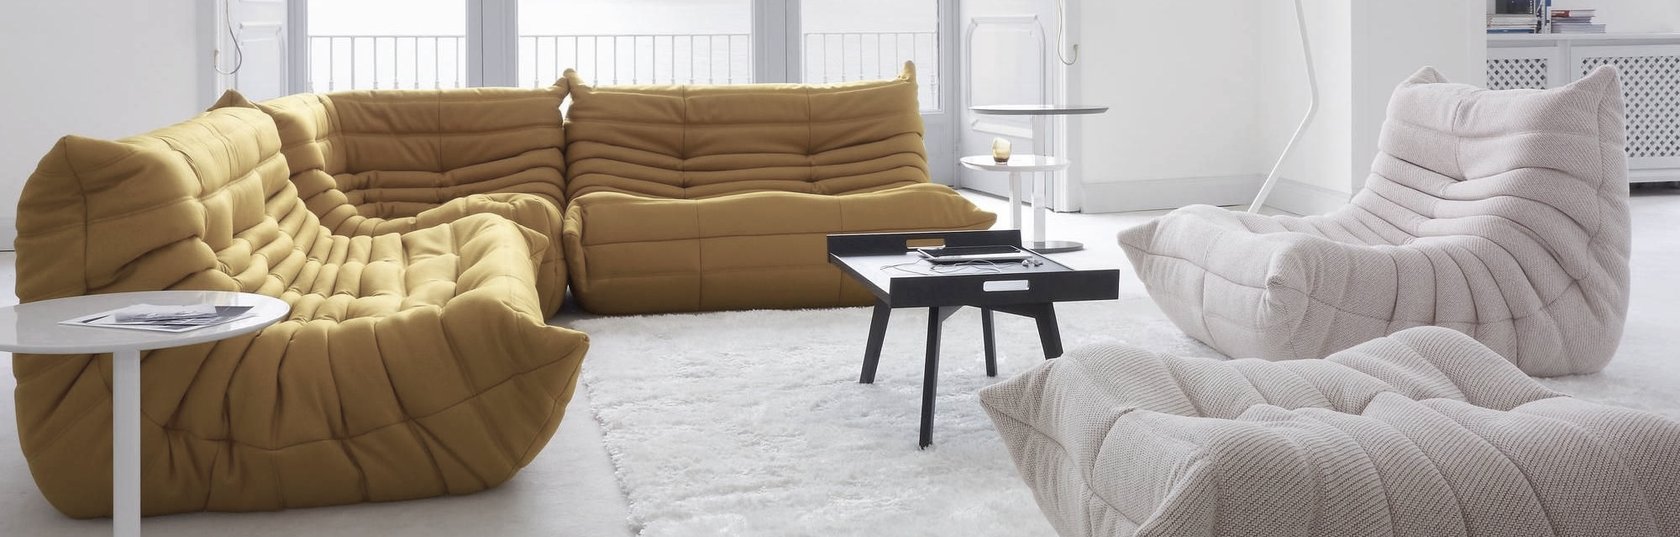 A French furniture brand offering iconic designs in NZ